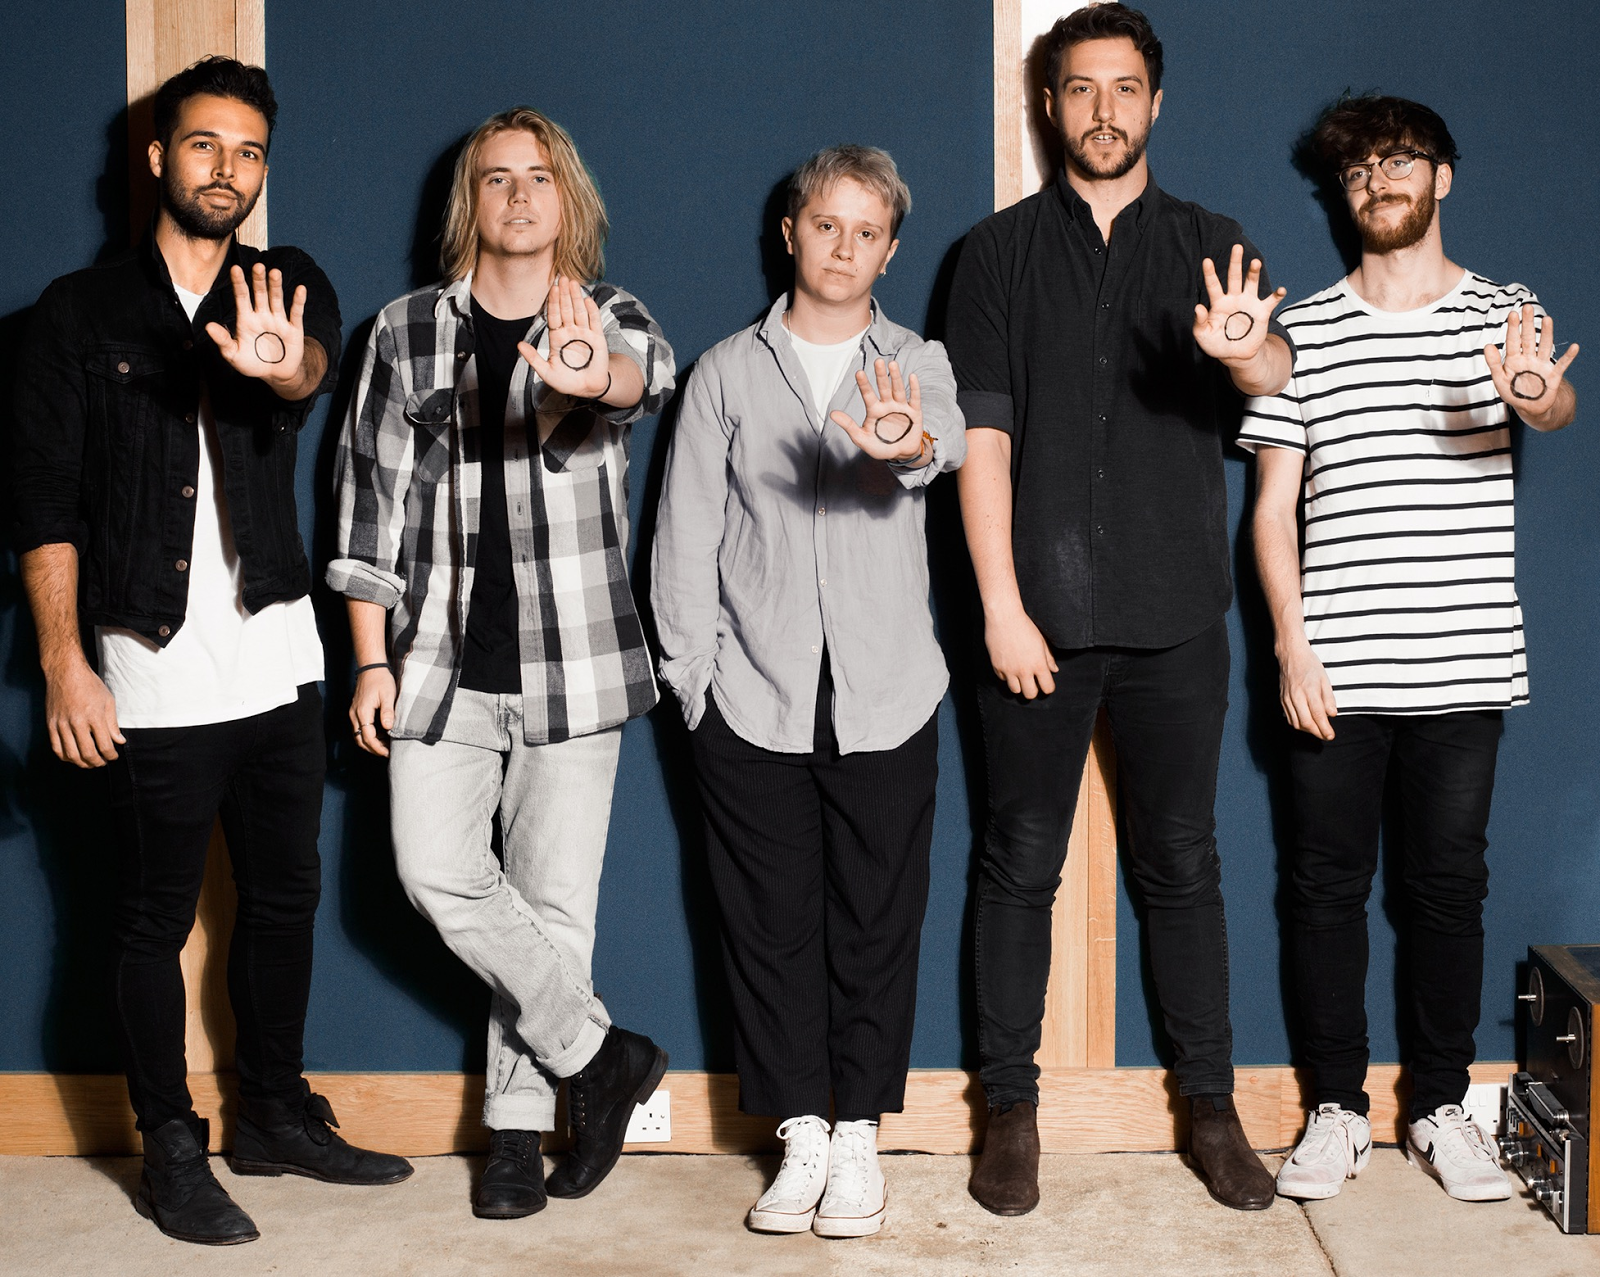 NOTHING BUT THIEVES TO LAUNCH #IAMWHOLE